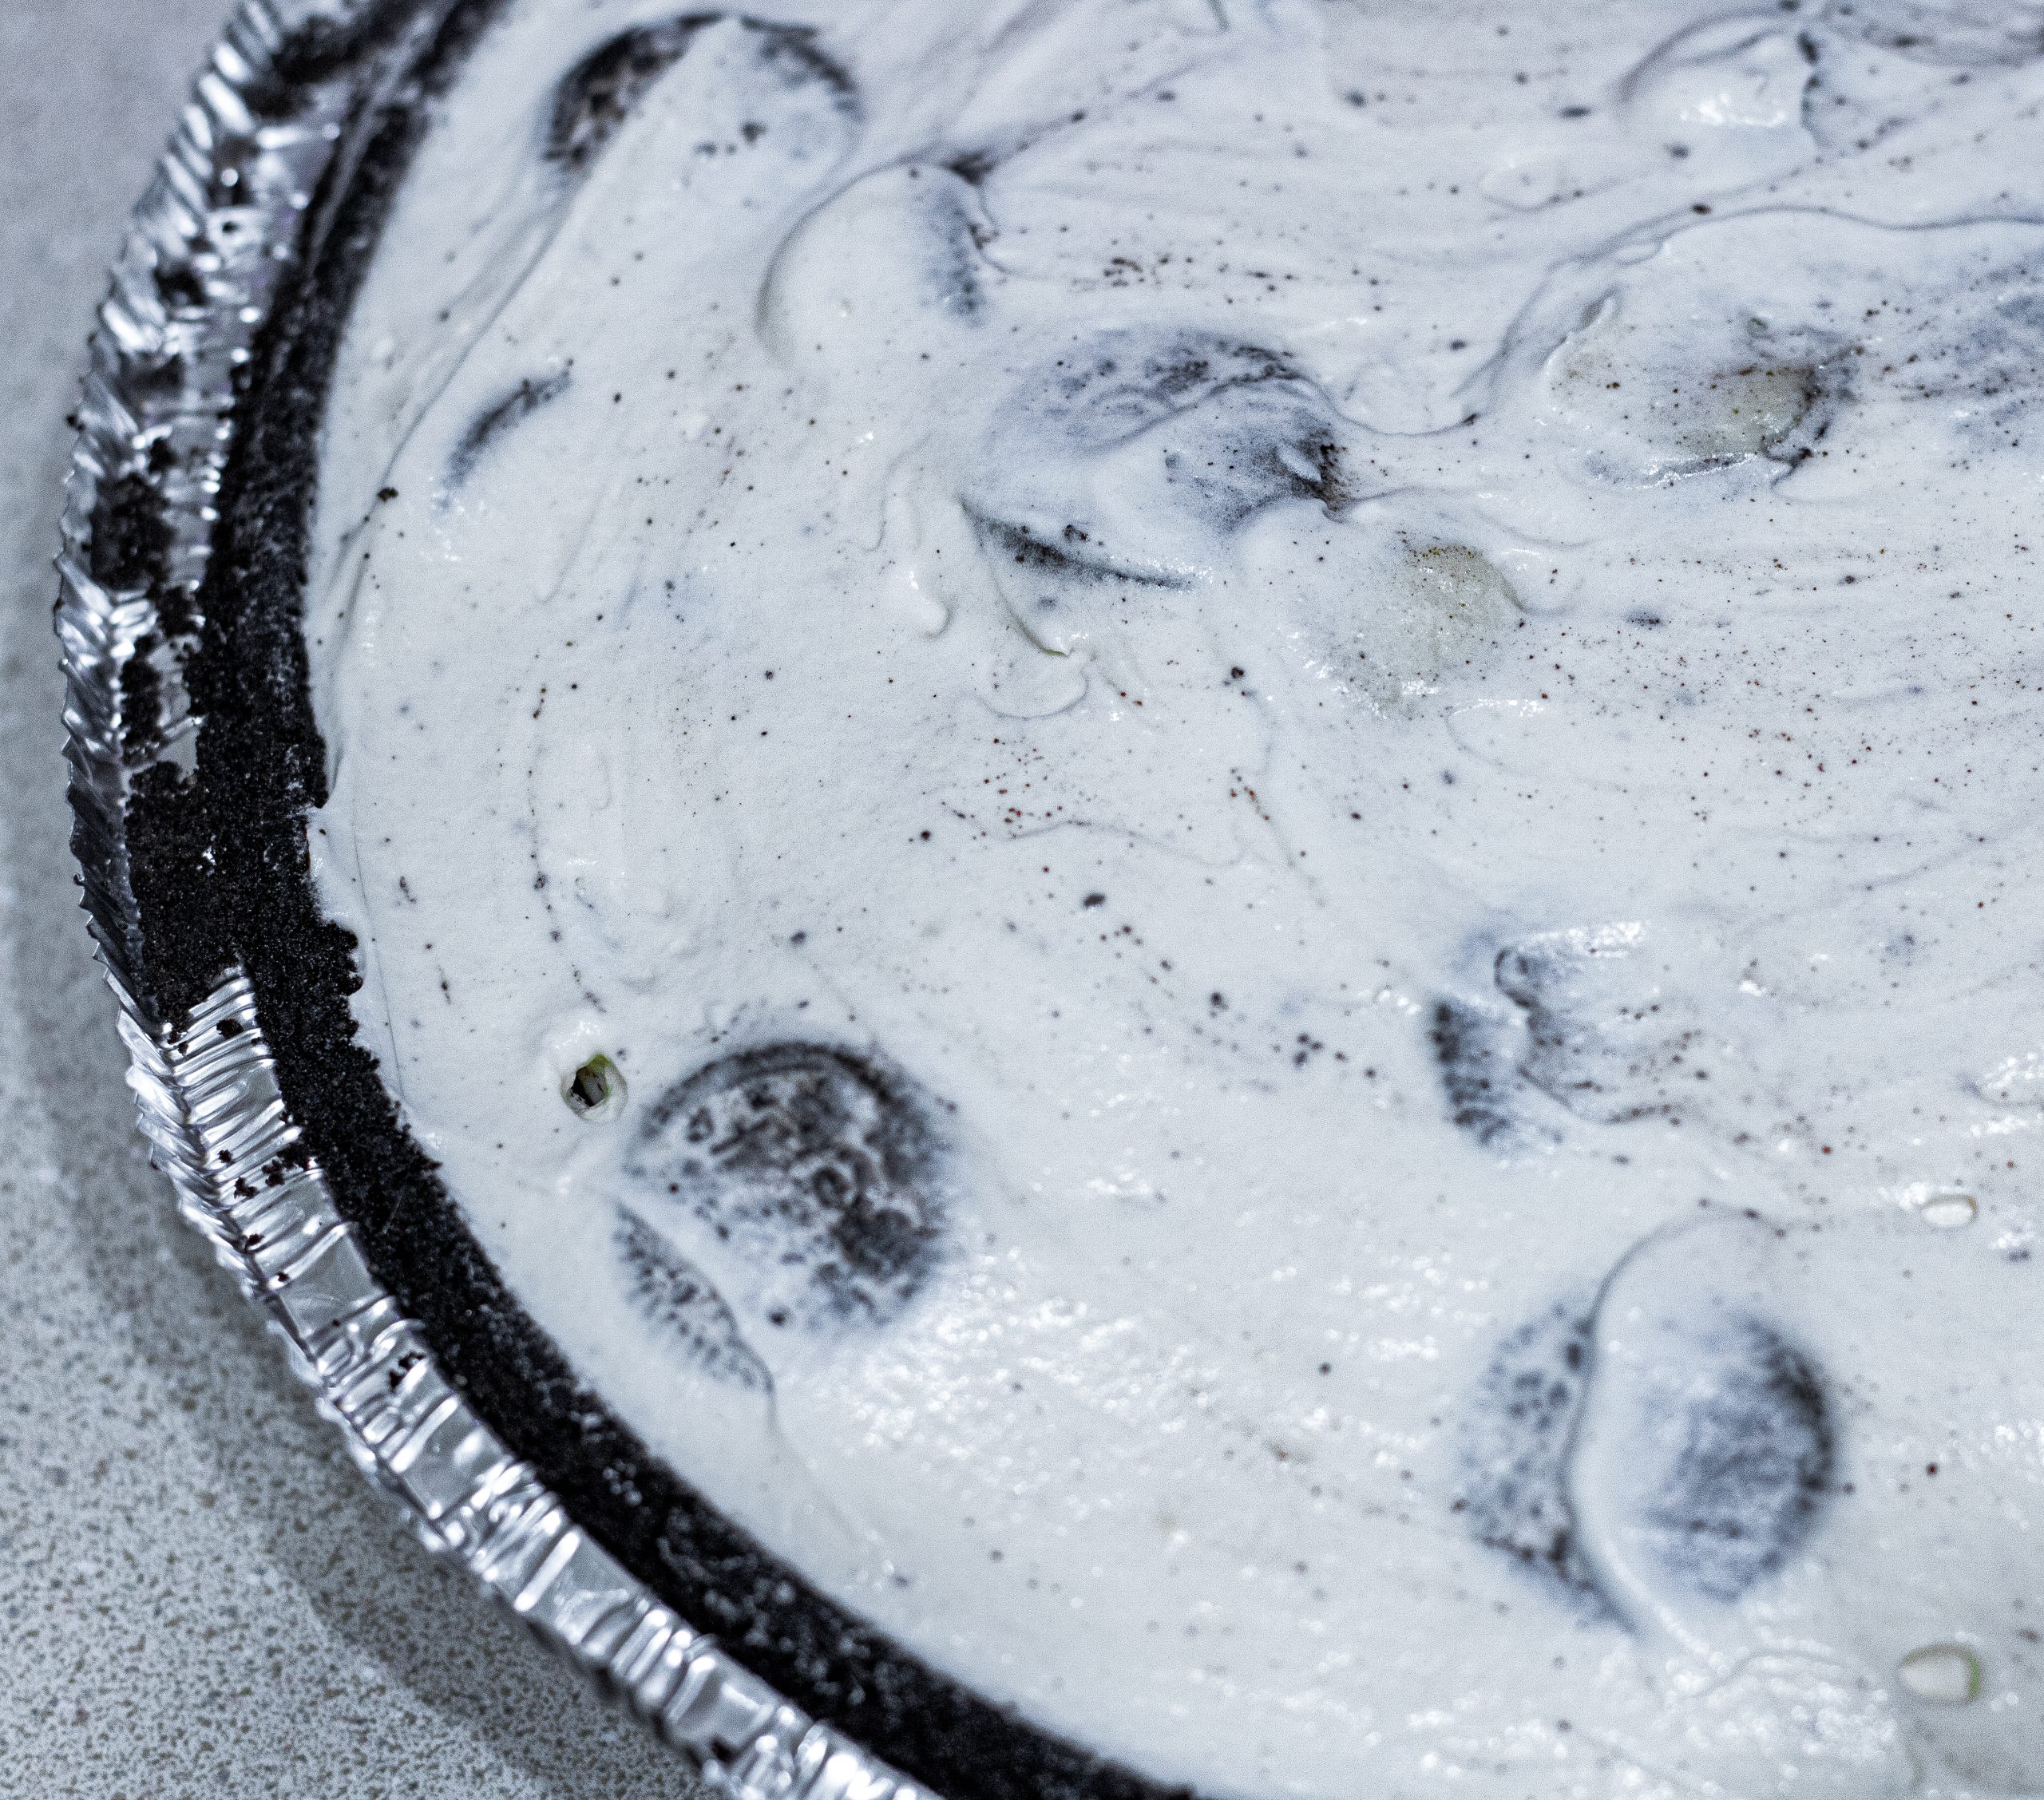 Pour mixture into the Oreo pie crust, making sure not to overfill.